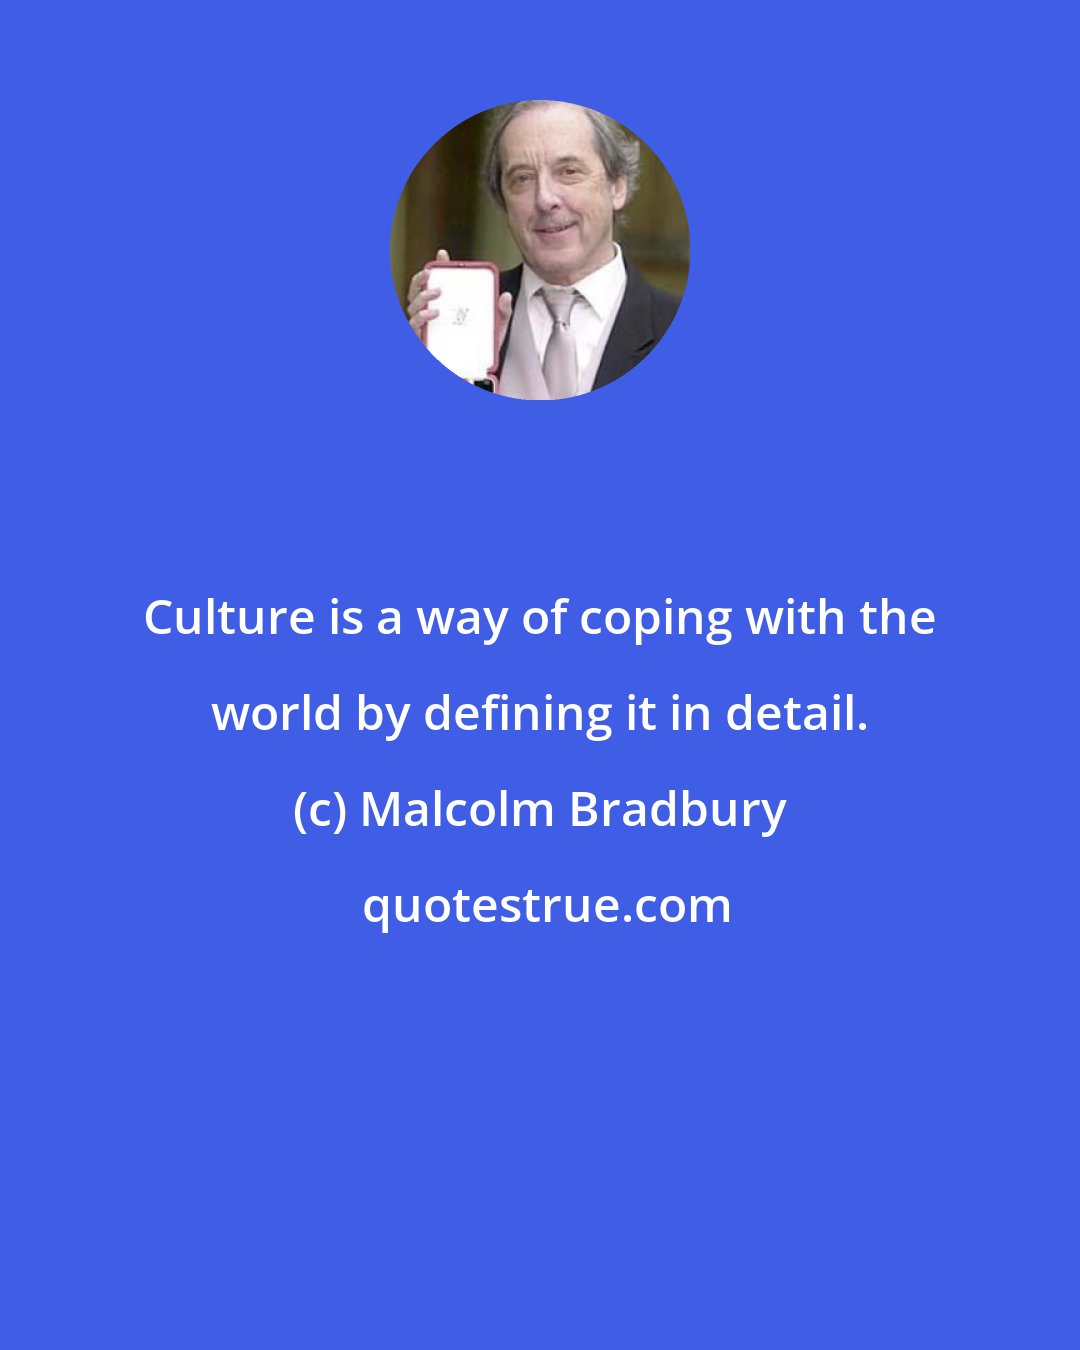 Malcolm Bradbury: Culture is a way of coping with the world by defining it in detail.